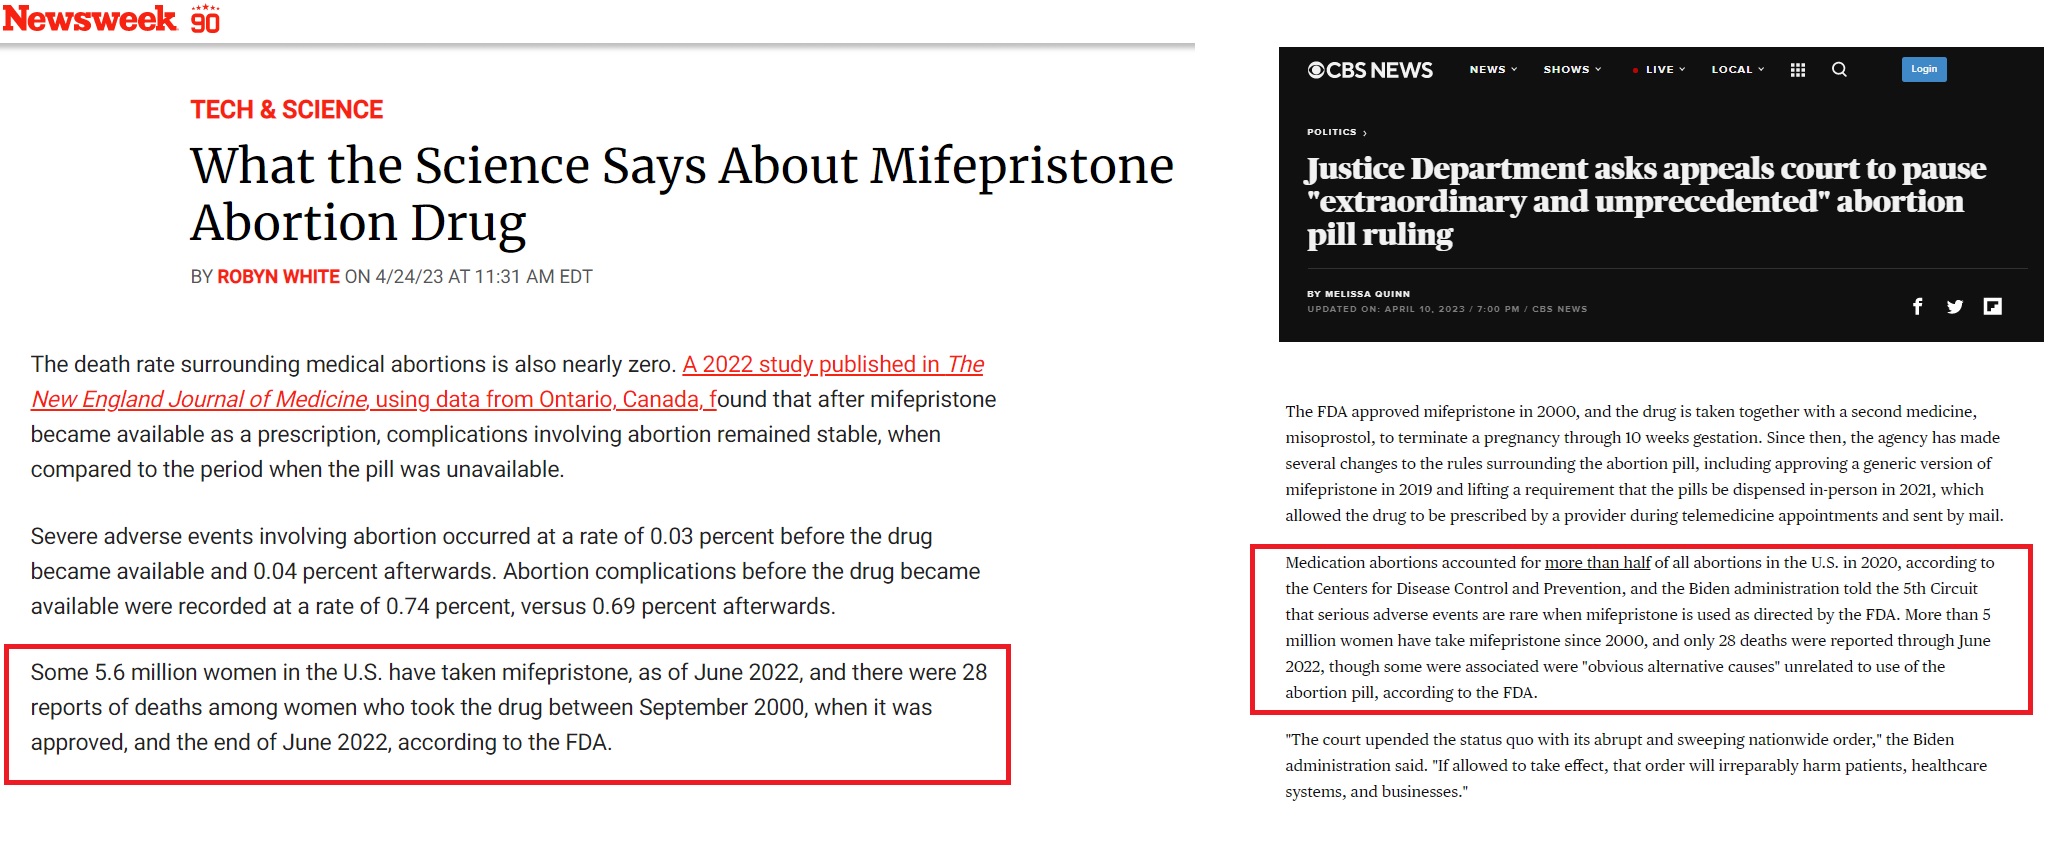 Image: Newsweek and CBS News on medication abortion deaths